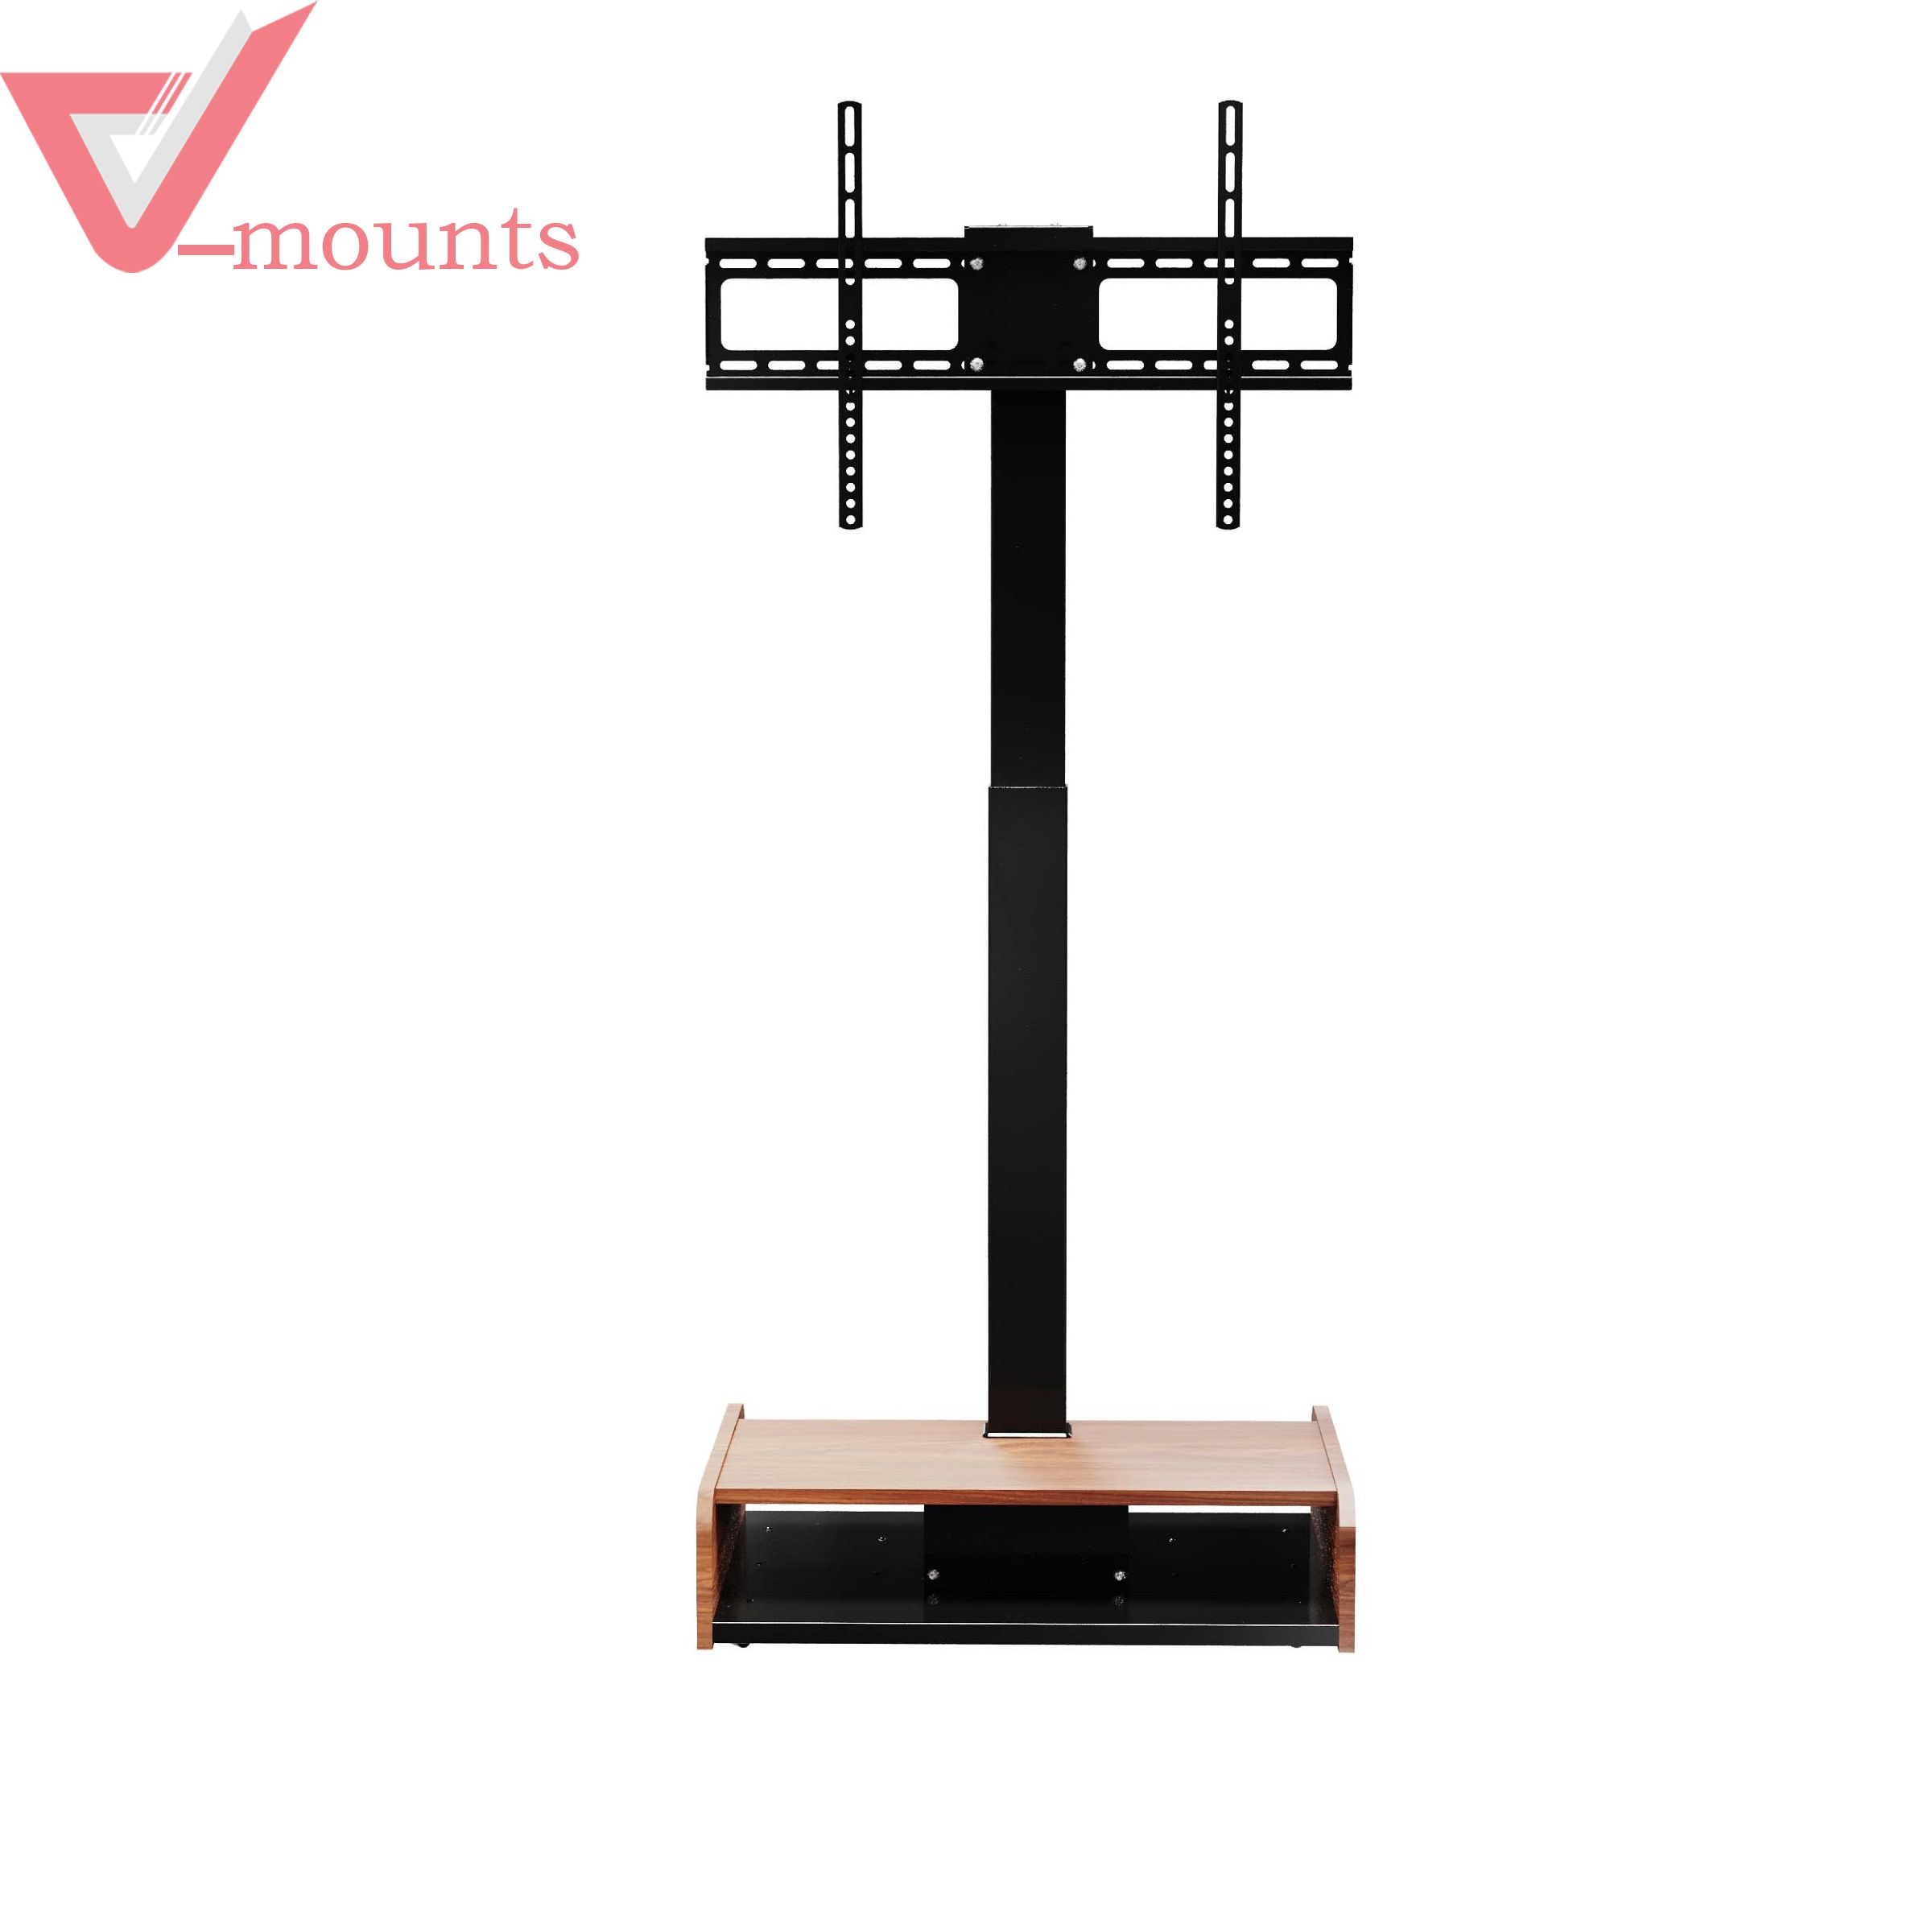 V-mounts Mobile Height Adjustable TV Stand with storage VM-TC001